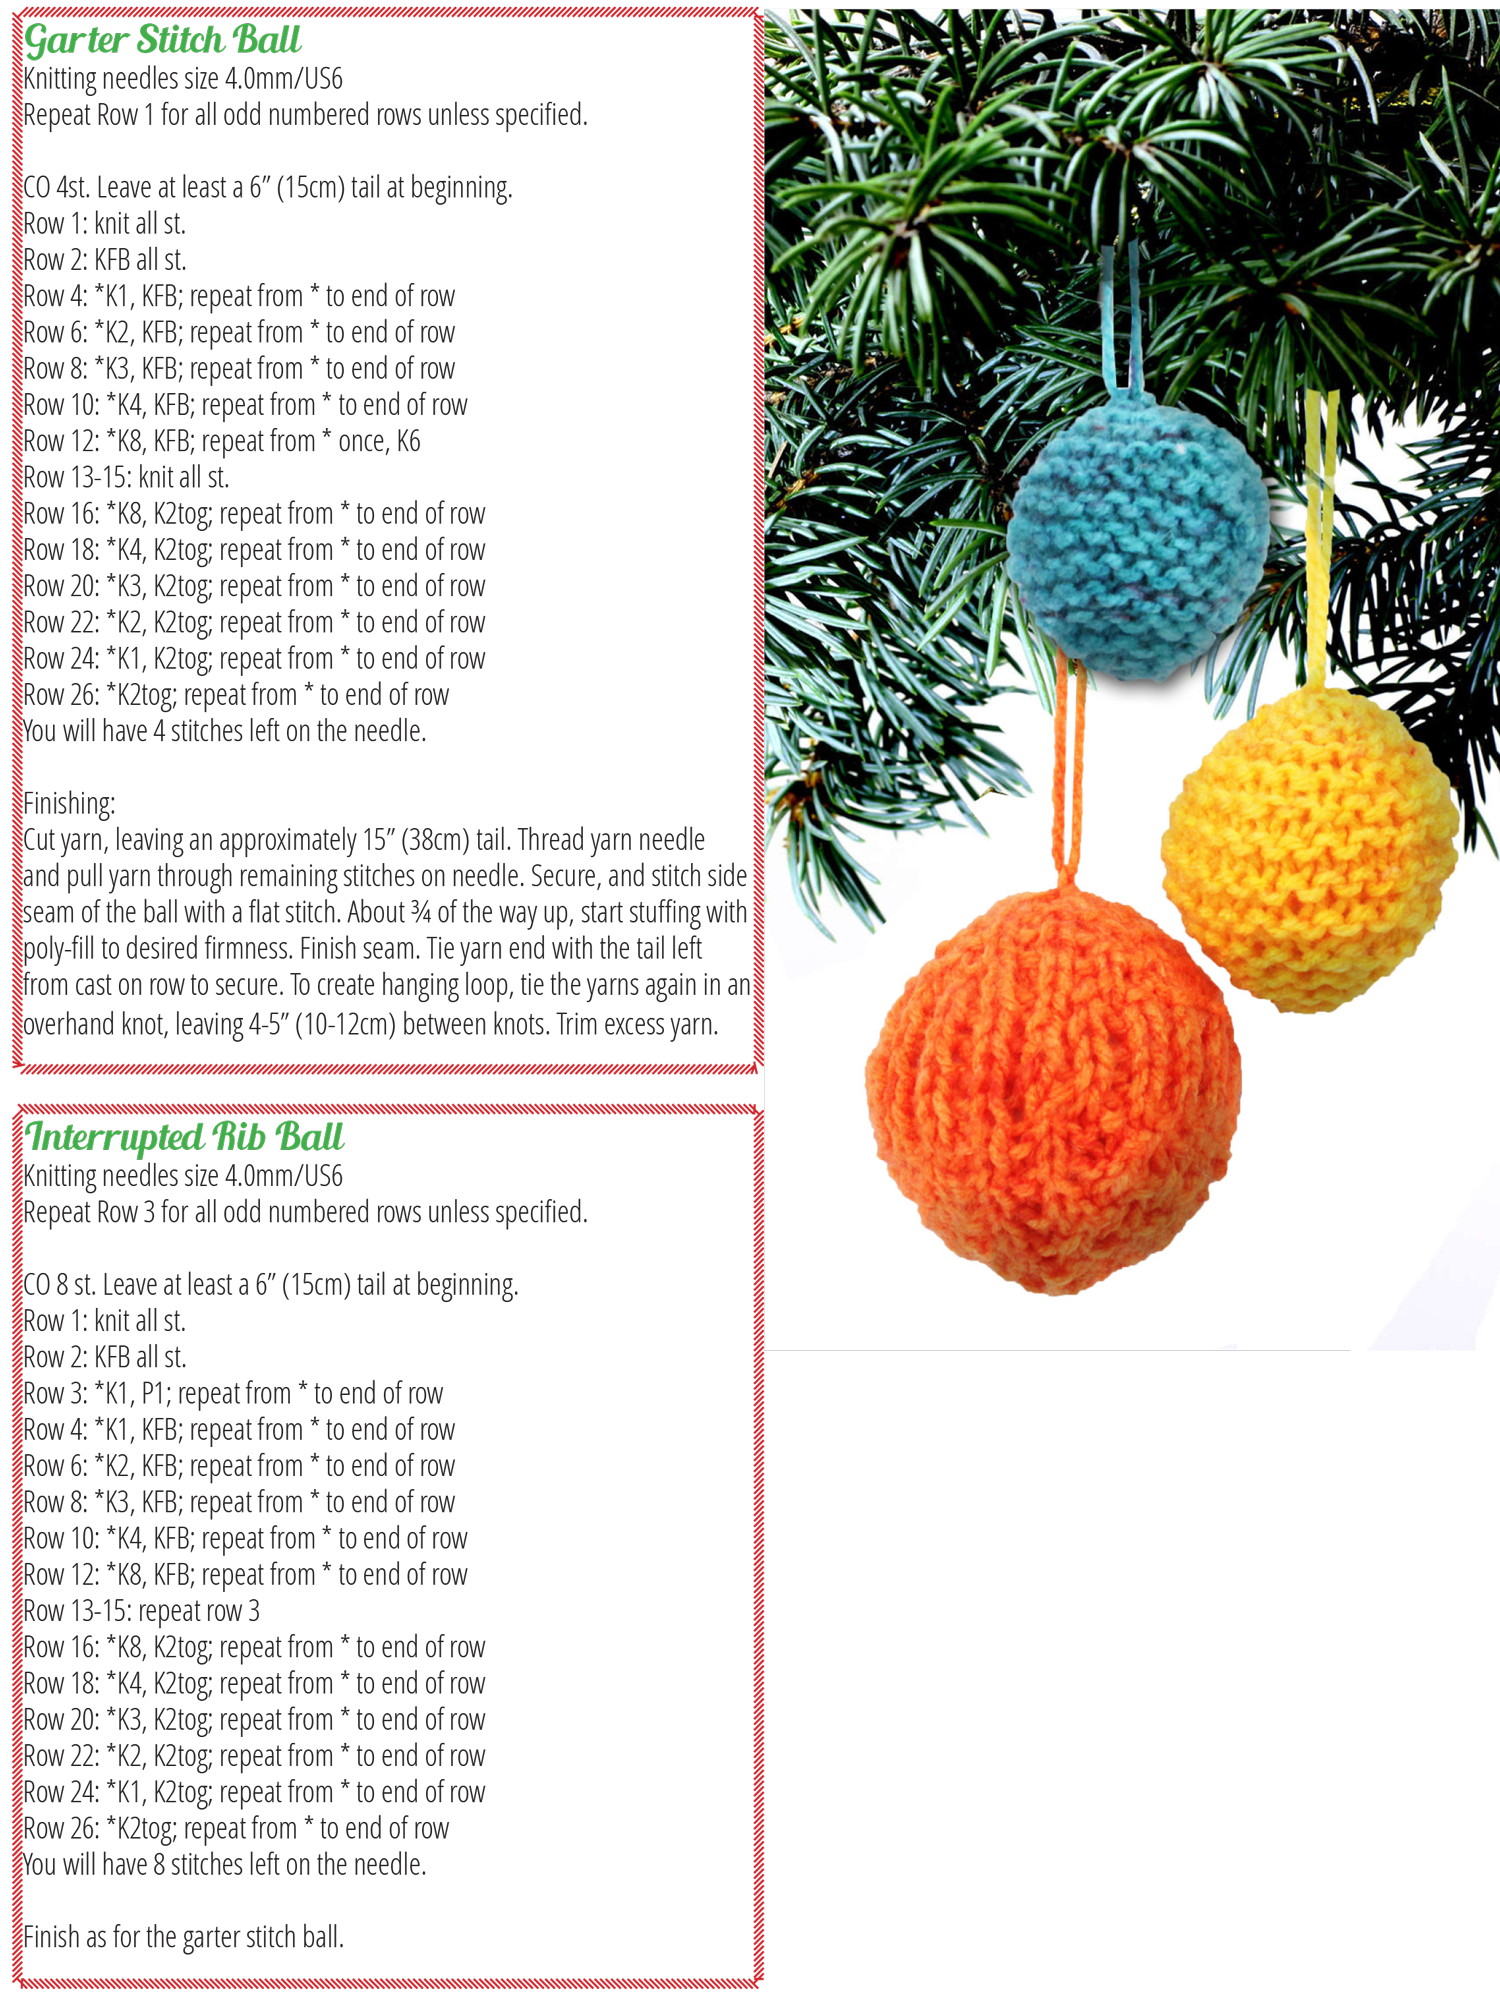 Steps to create garter stitch balls and interrupted rib balls knitted ornaments